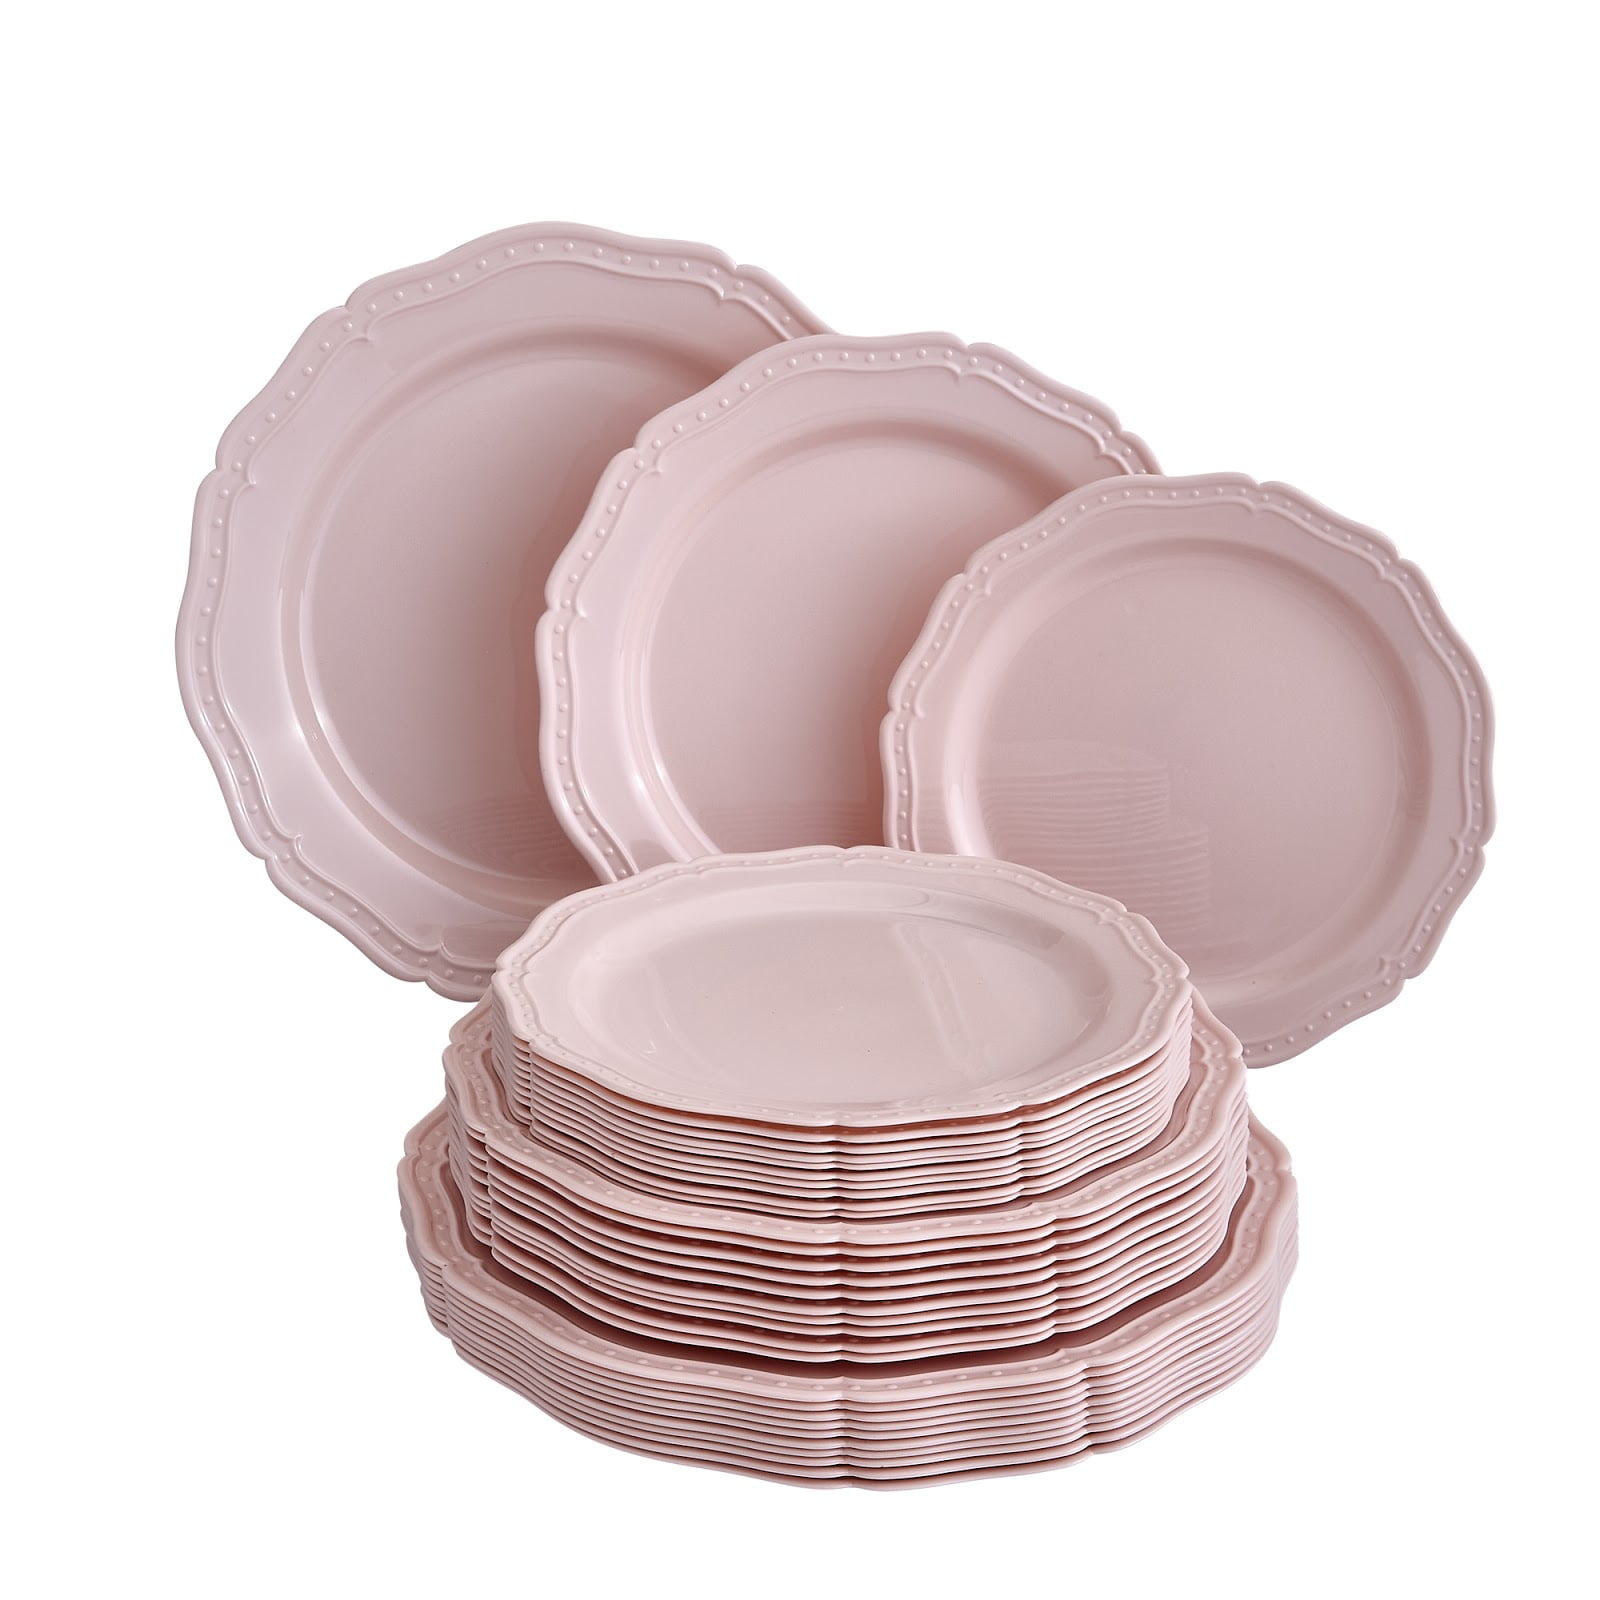 20 Baby Shower Plates PLASTIC PLATES DISPOSABLE French CountrySide Collection 10.25” Pink 